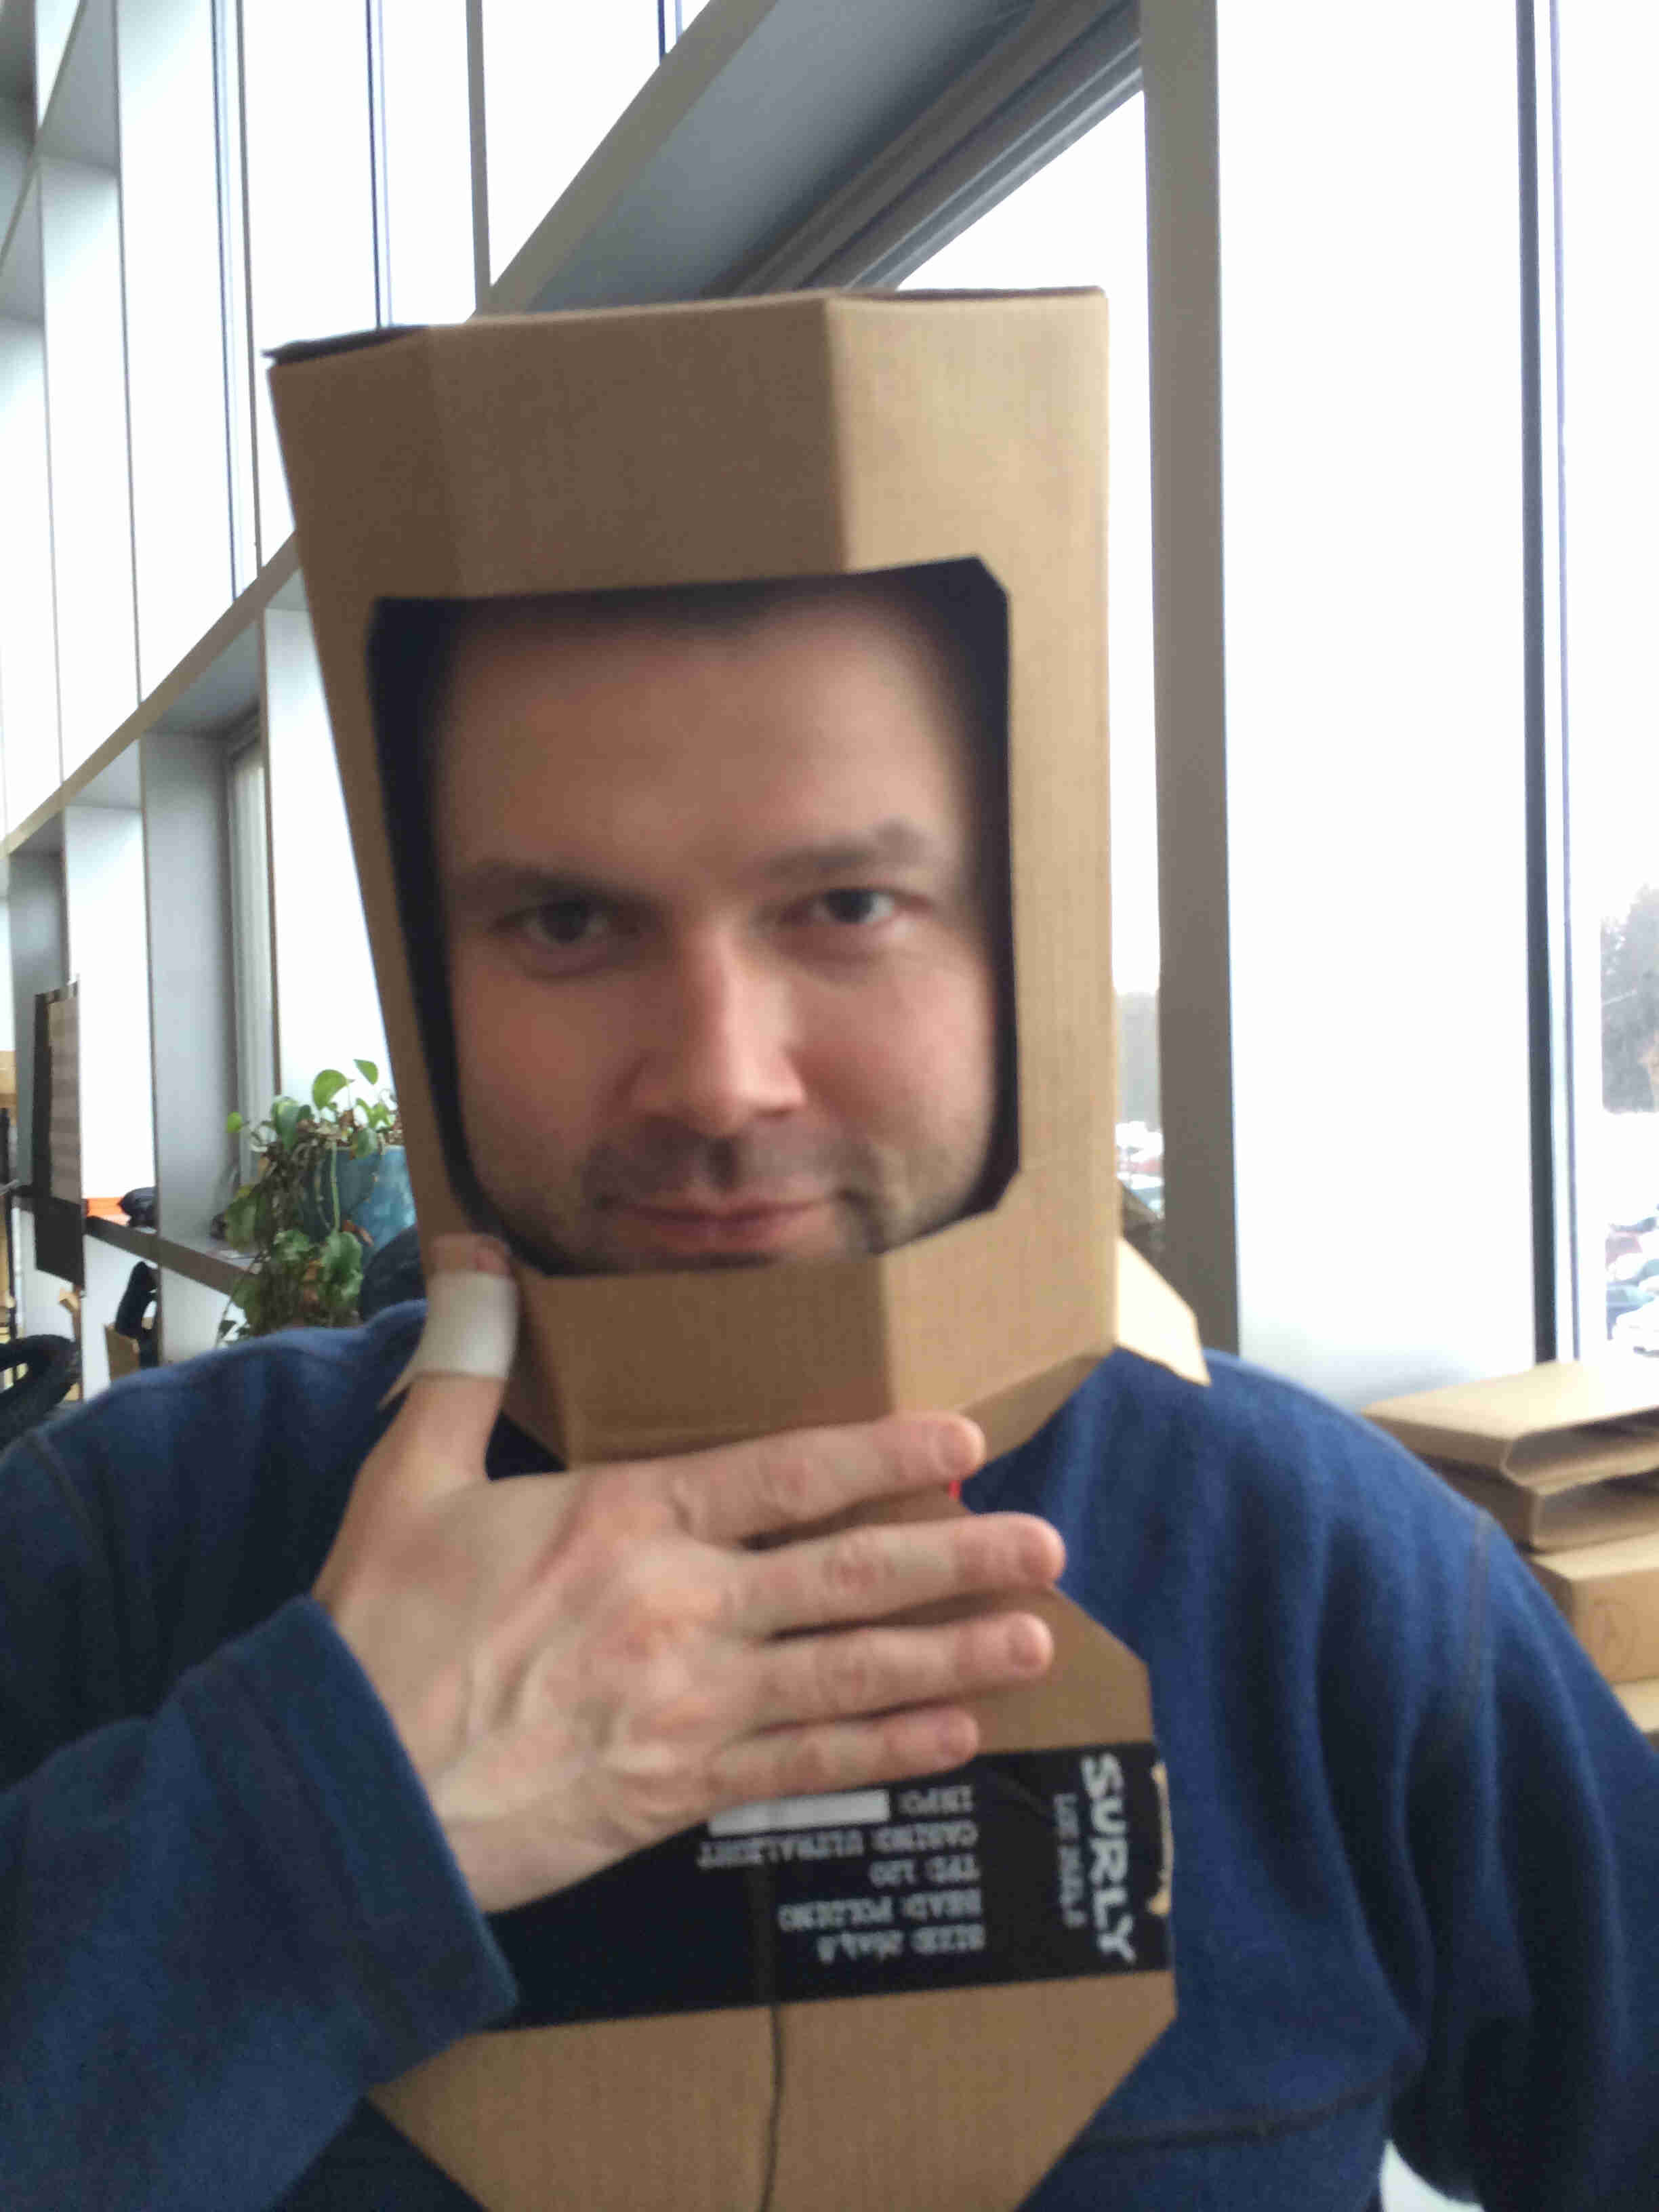 Headshot of a person a helmet made out of a cardboard box, with a Surly Bikes sticker on it